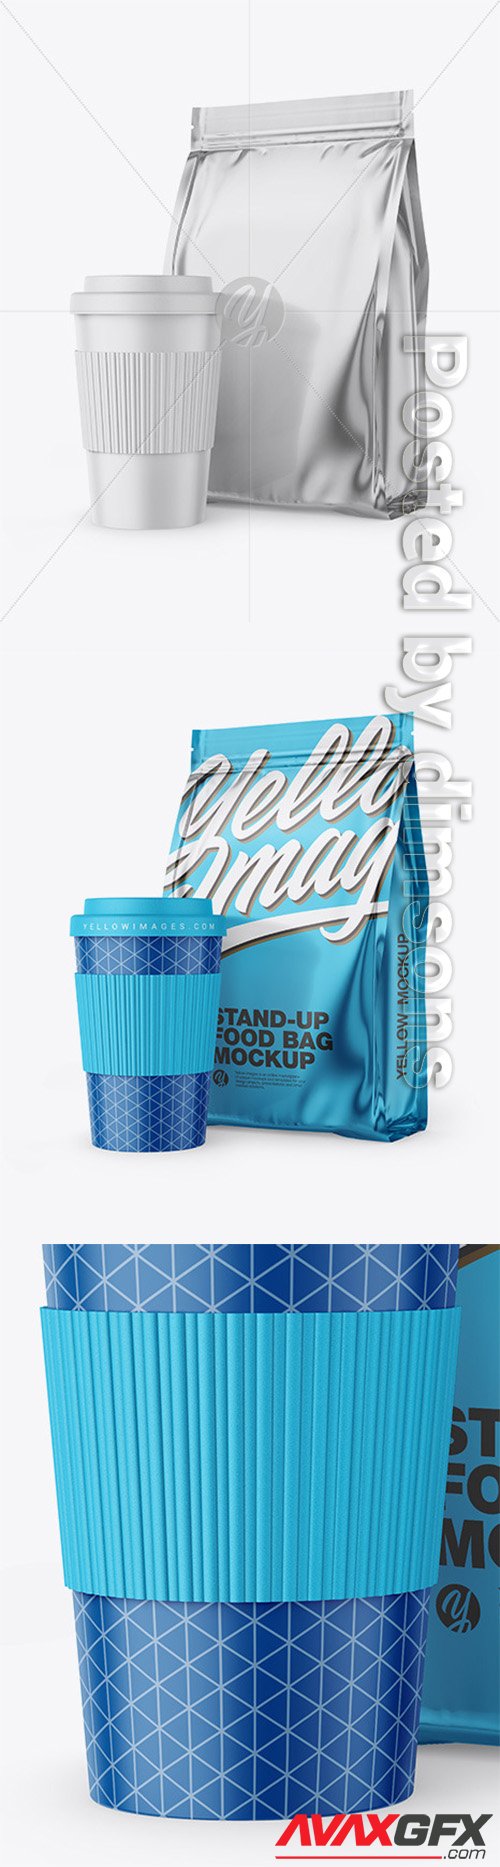 Download Kraft Stand Up Bag With Coffee Mug Mockup 66561 Avaxgfx All Downloads That You Need In One Place Graphic From Nitroflare Rapidgator PSD Mockup Templates